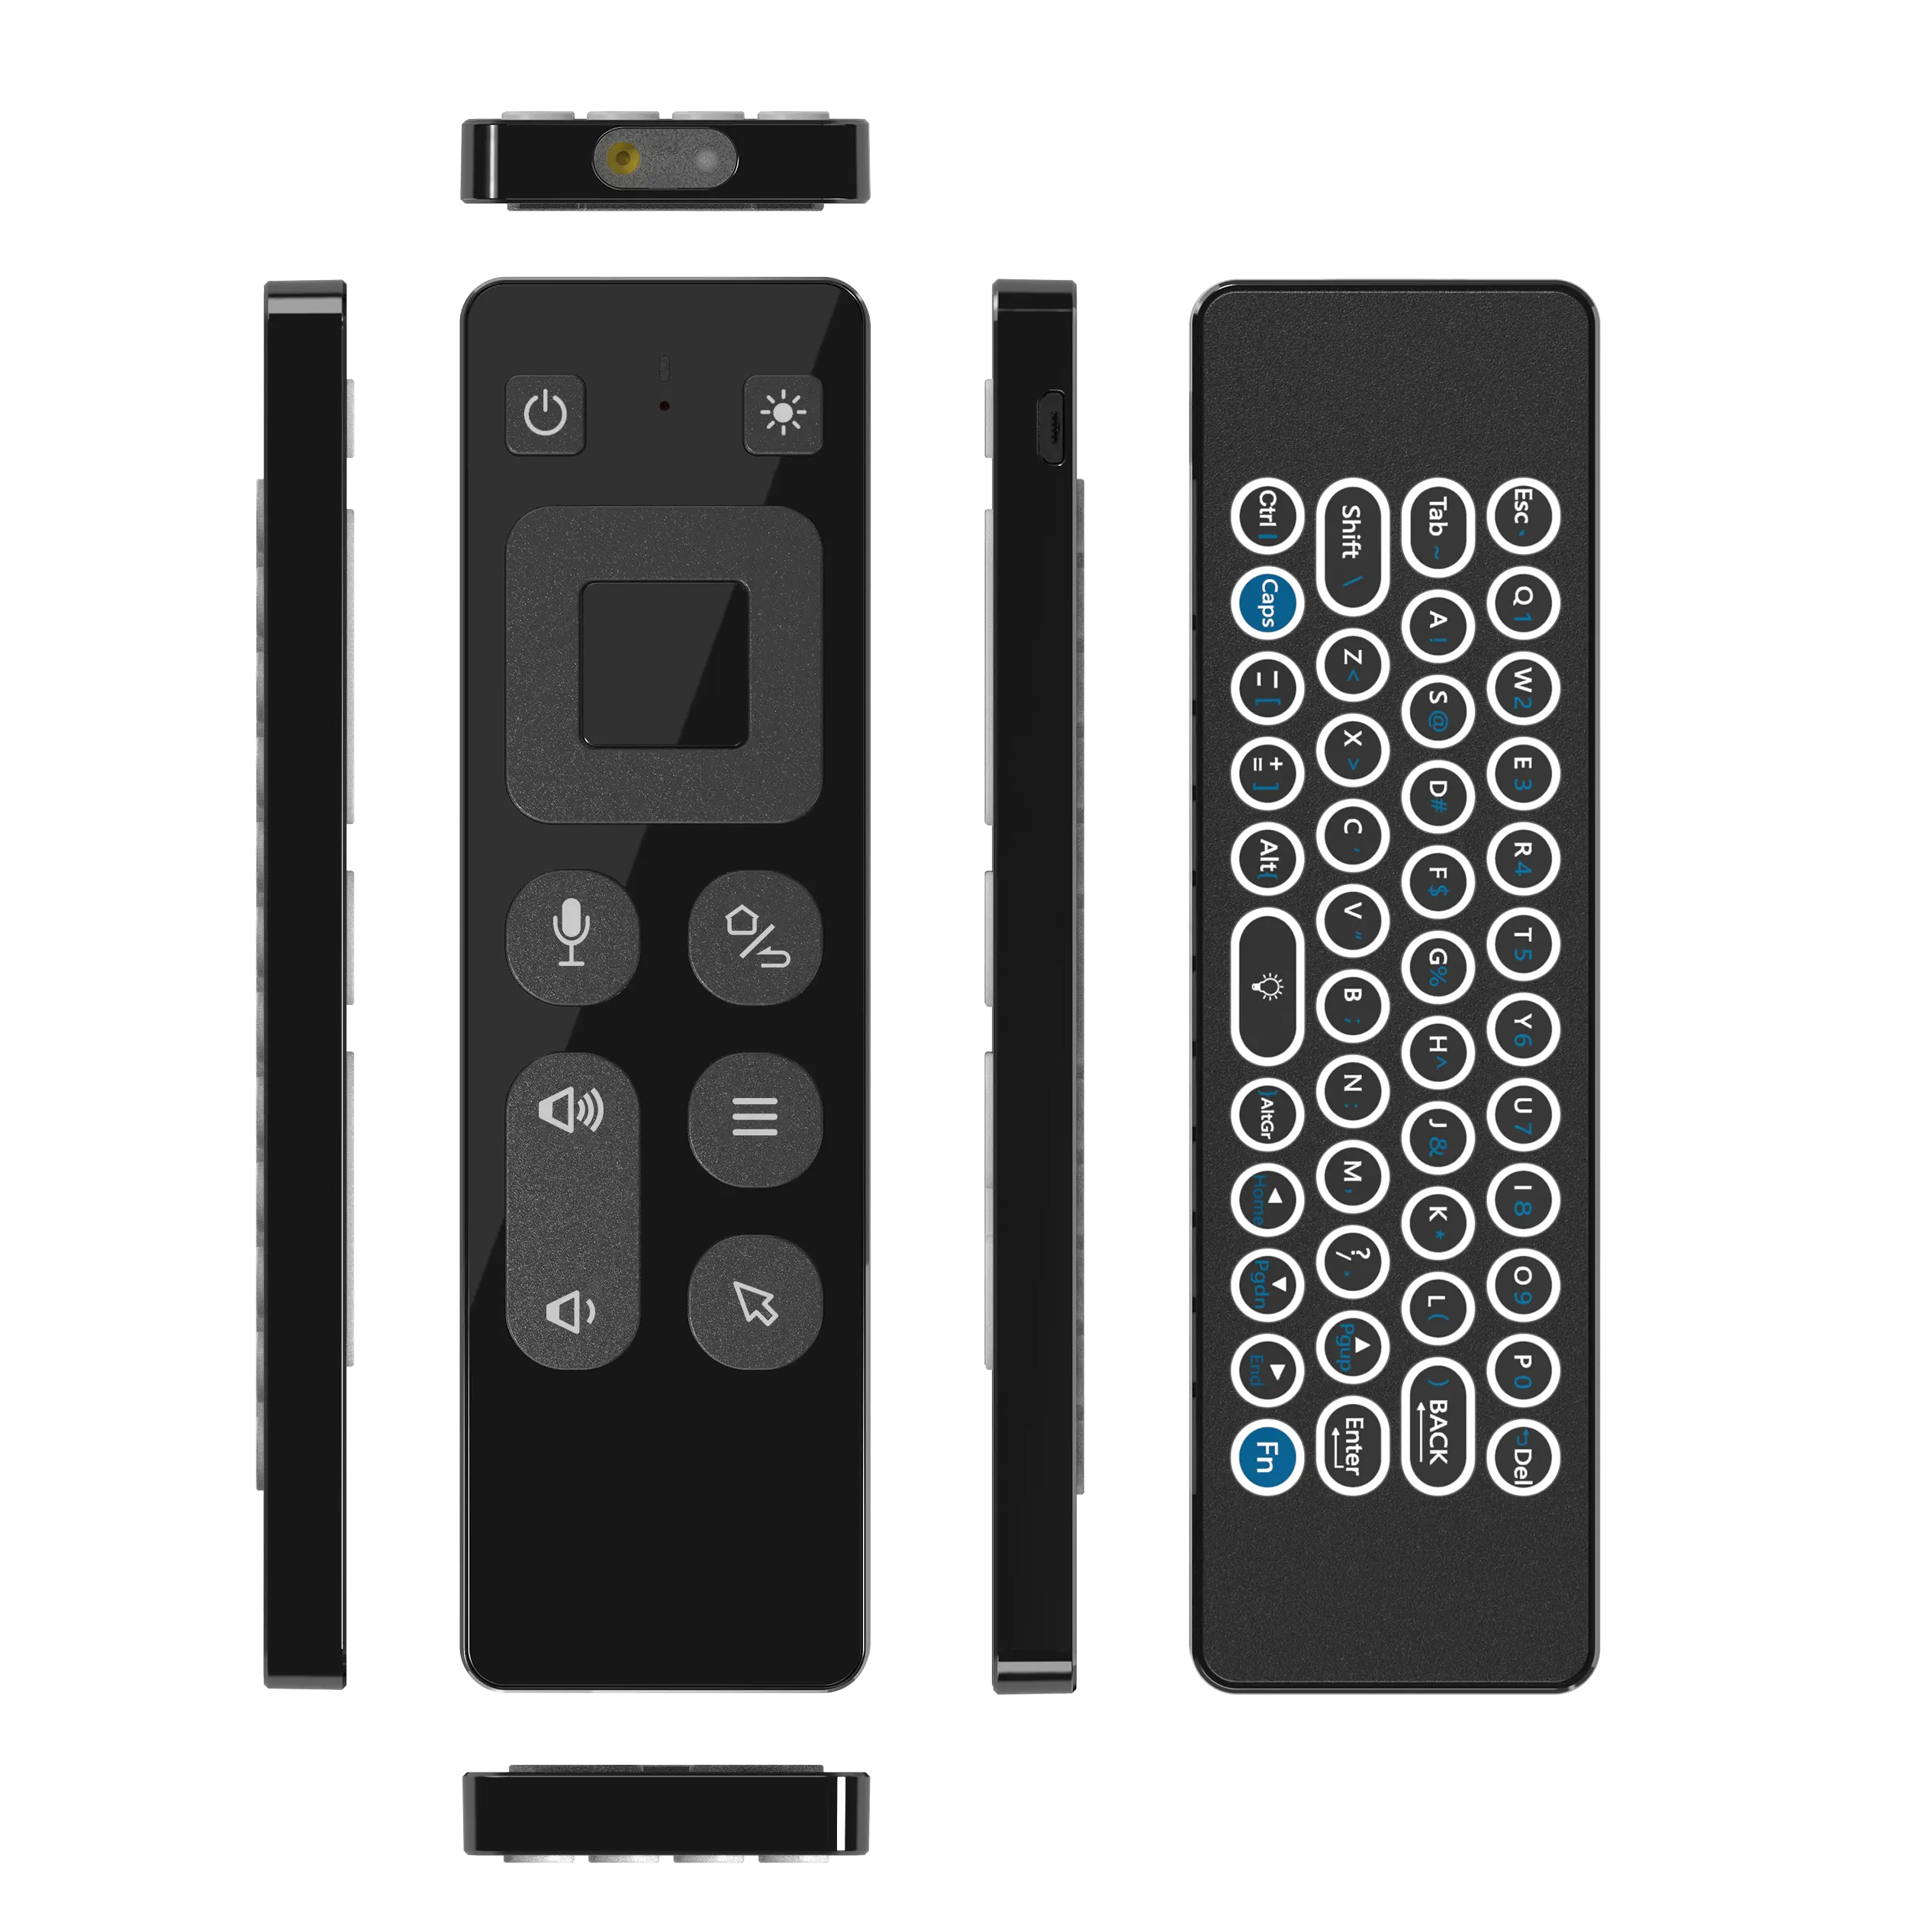 T9 2.4G wireless remote control with backlight keyboard